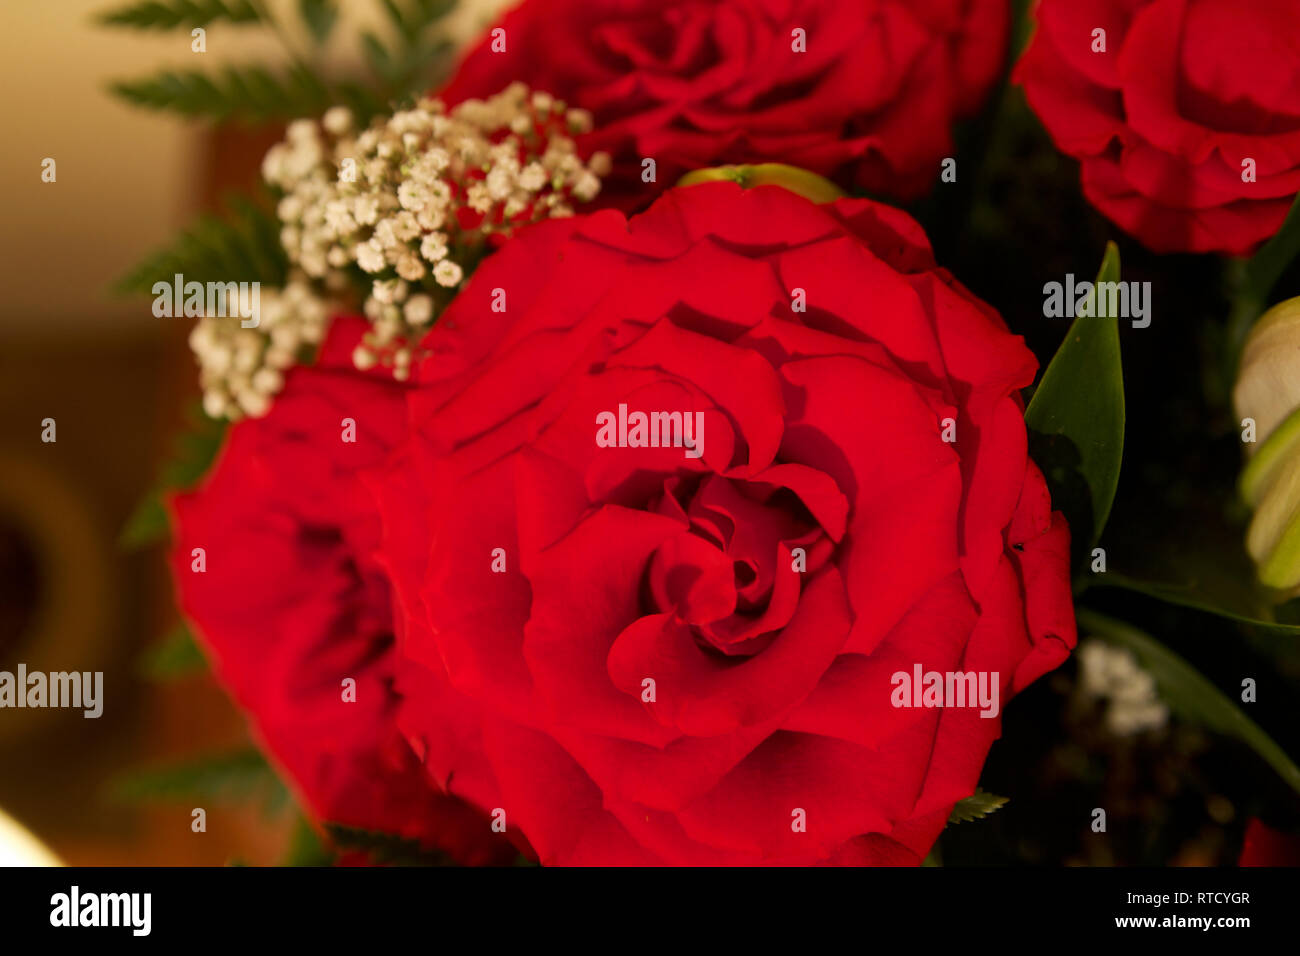 Dubai-Red roses in a glass watered flower vase 9 Stock Photo